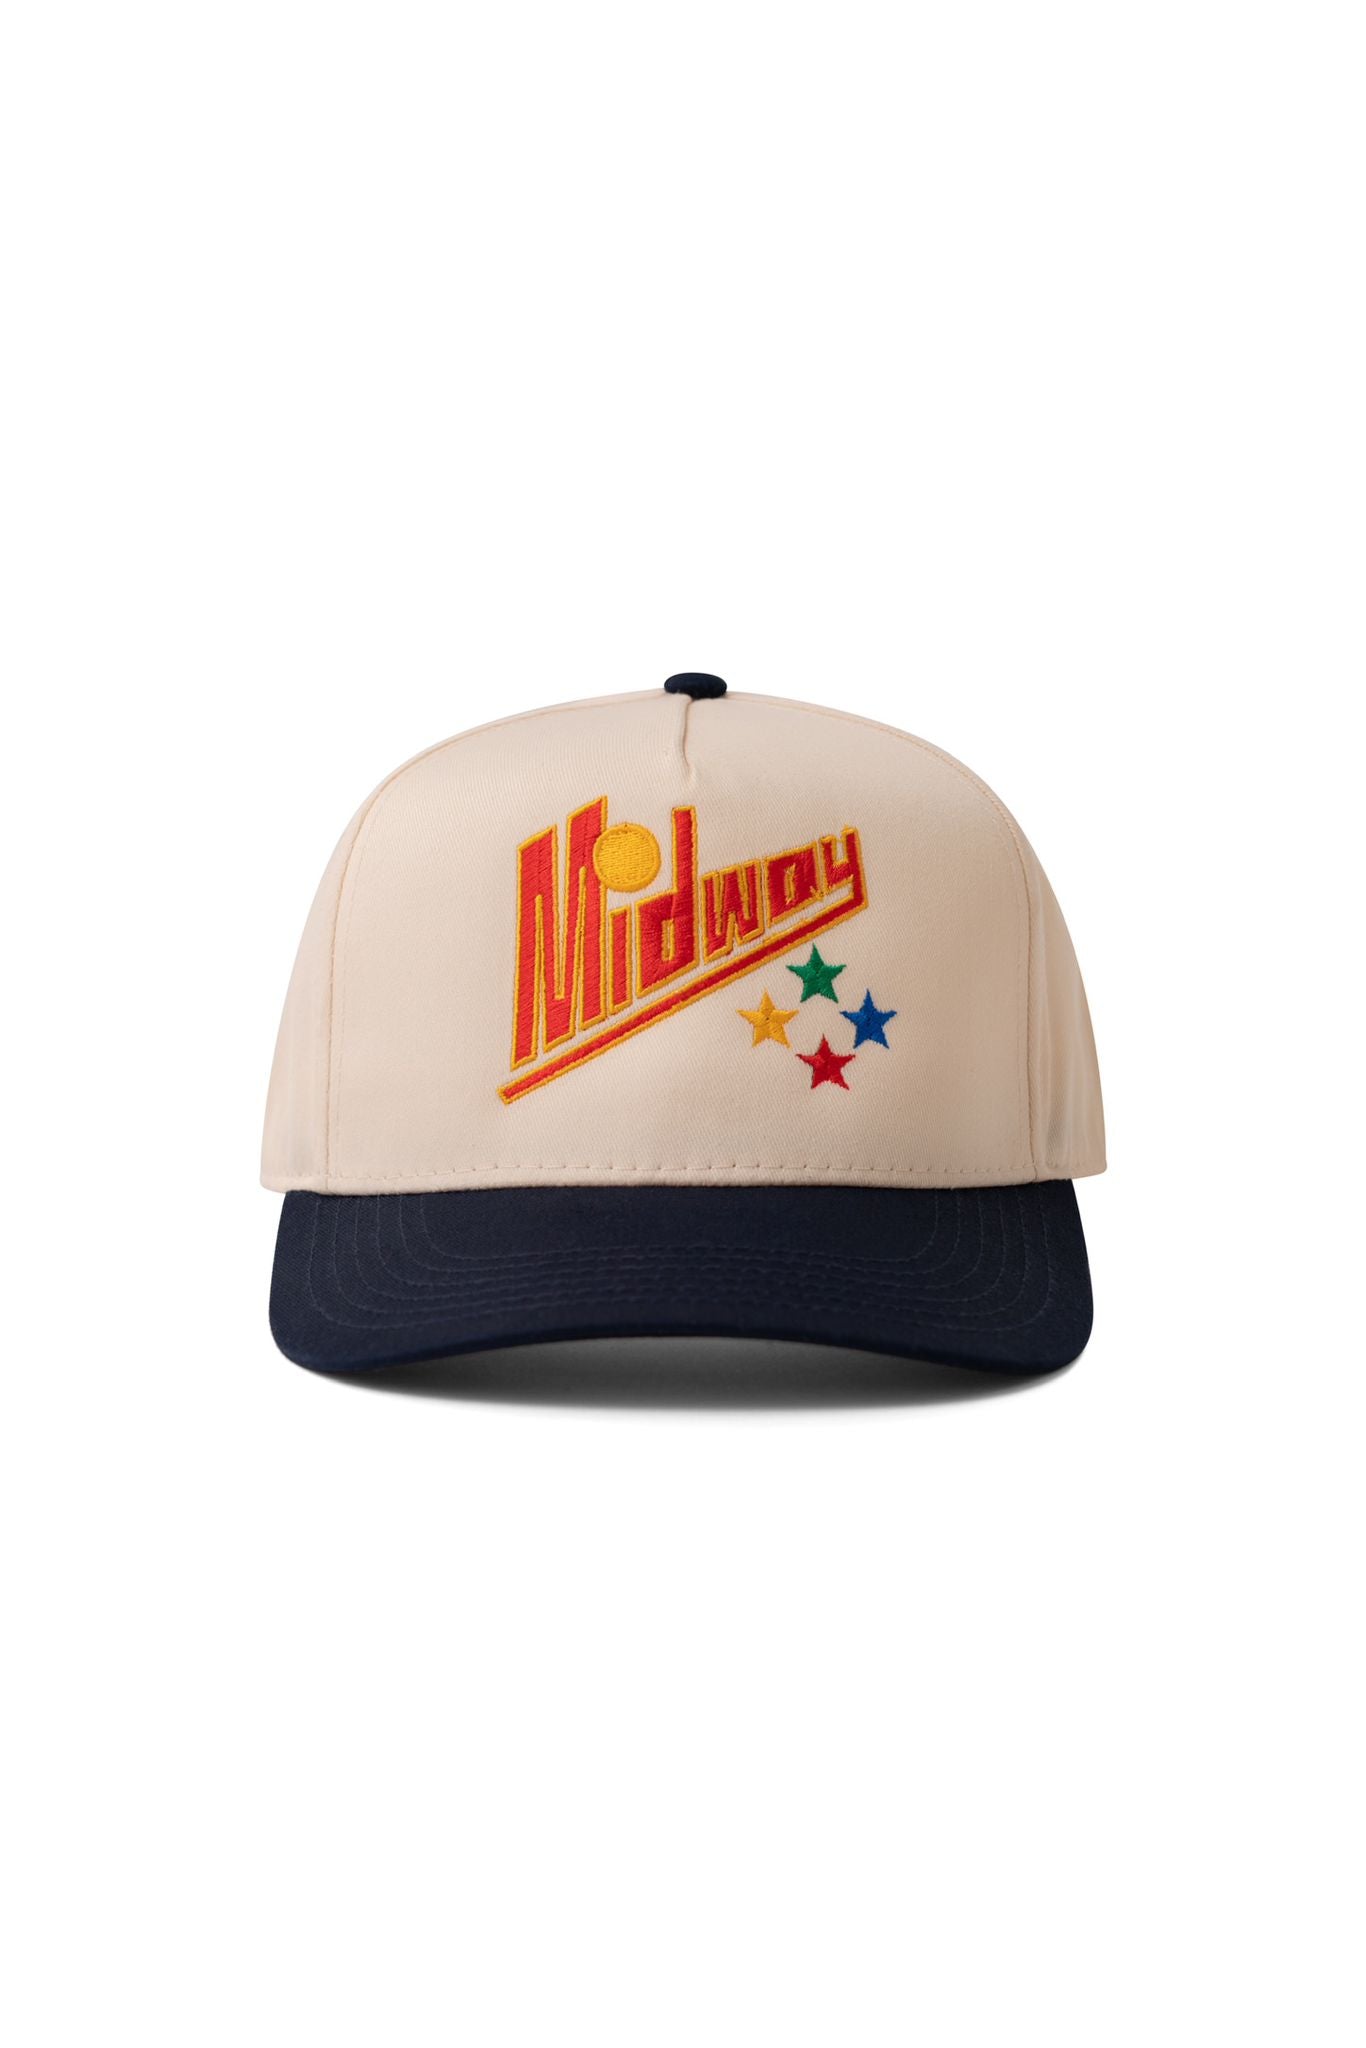 Midway Mundial Vintage Two-Tone Snapback